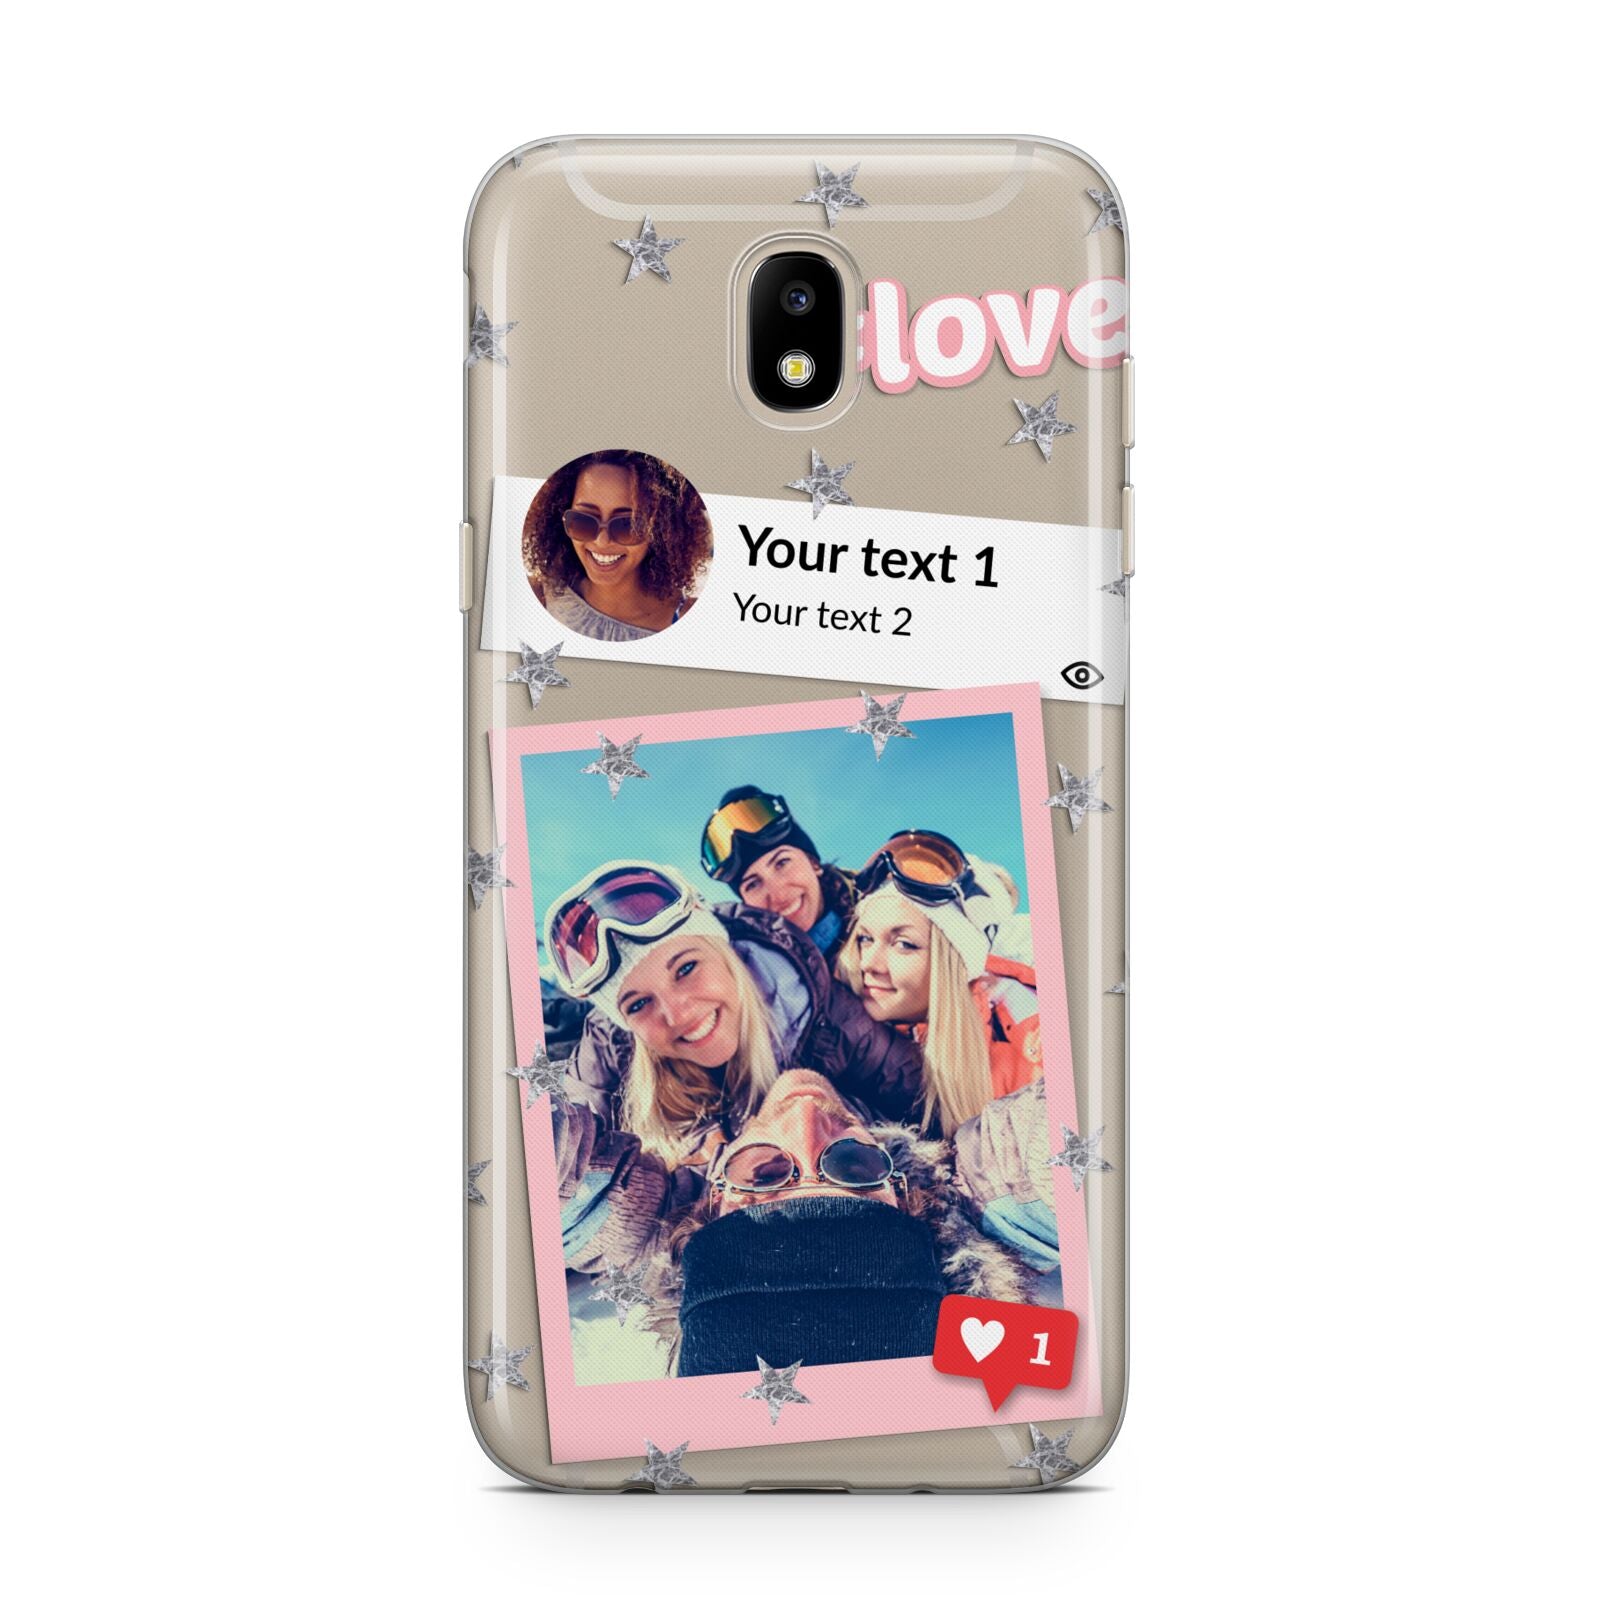 Starry Social Media Photo Montage Upload with Text Samsung J5 2017 Case